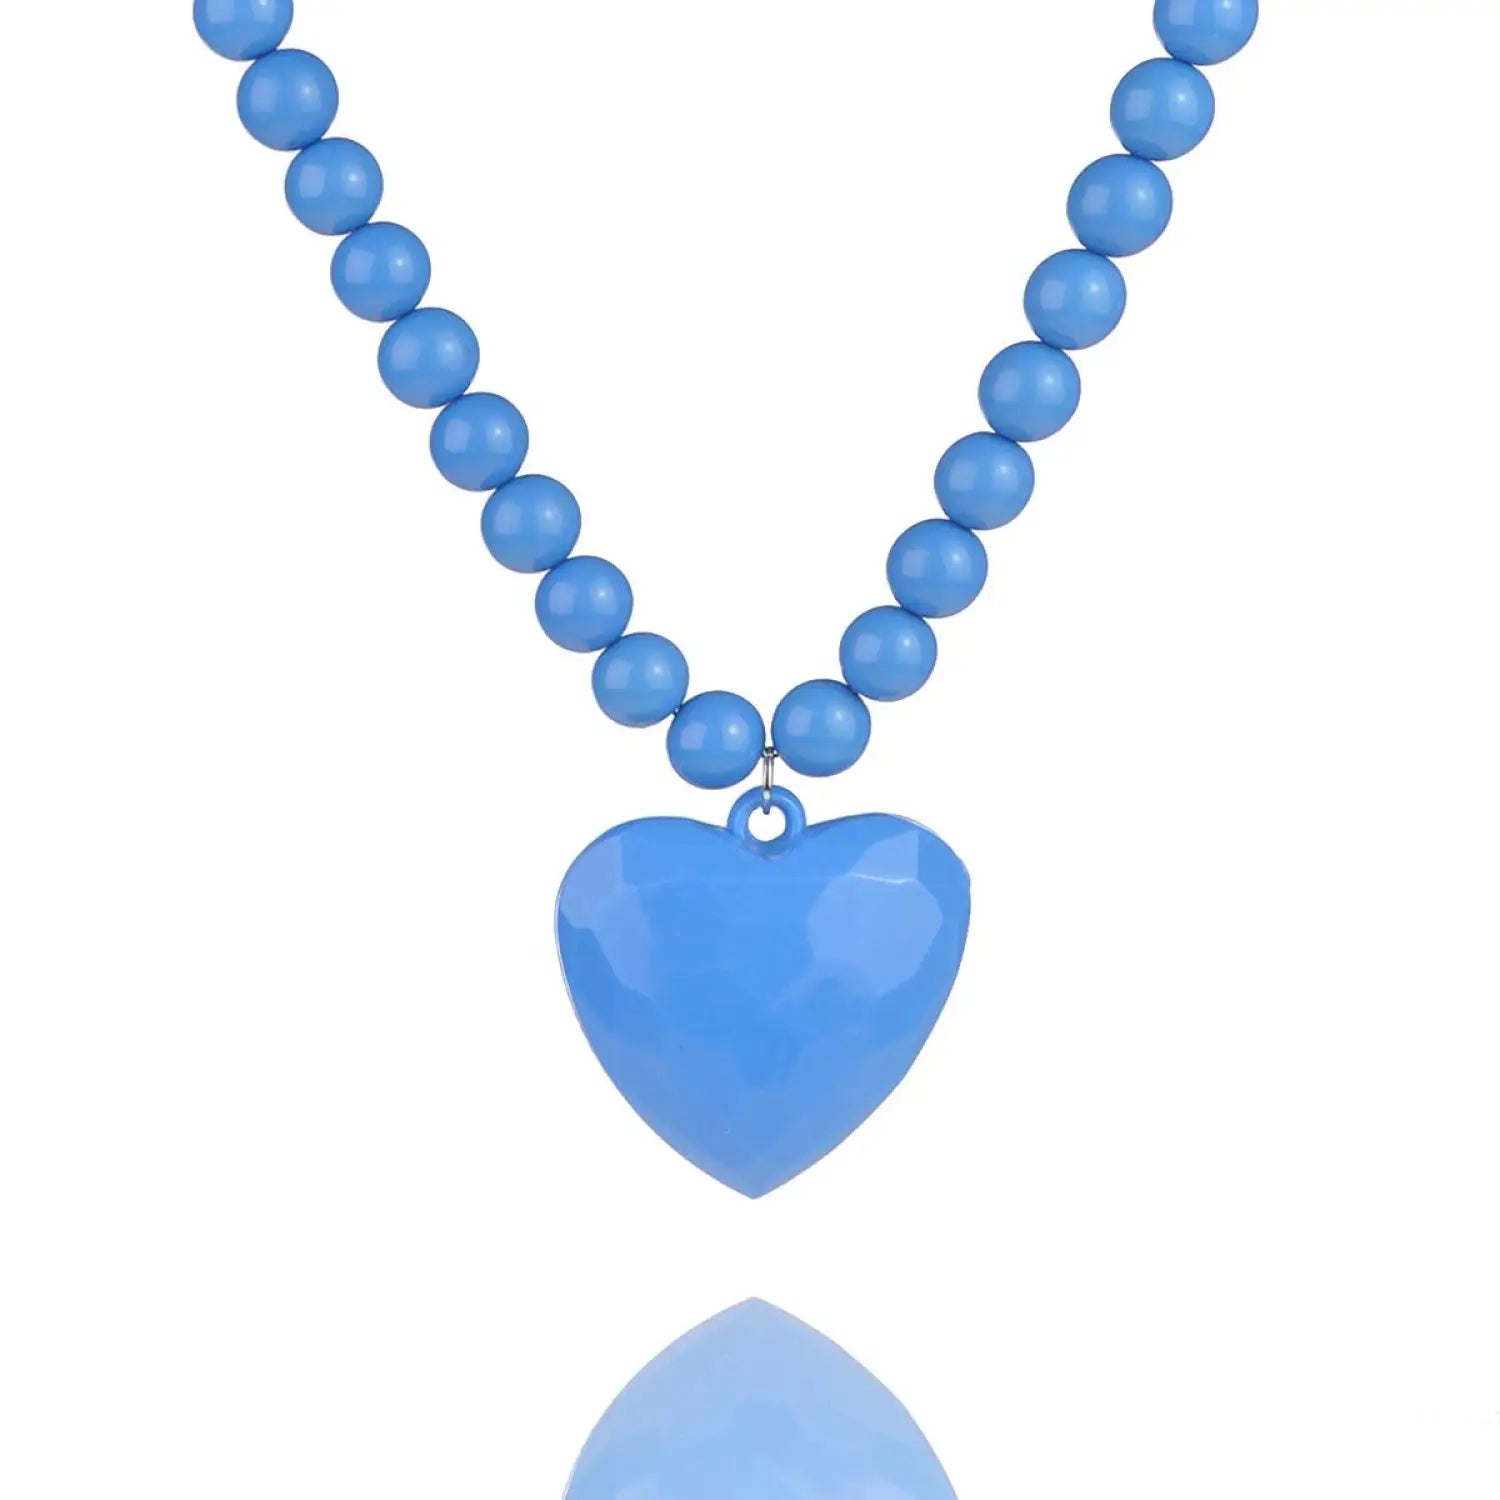 Blue heart charm ball chain necklace with silver clasp on display